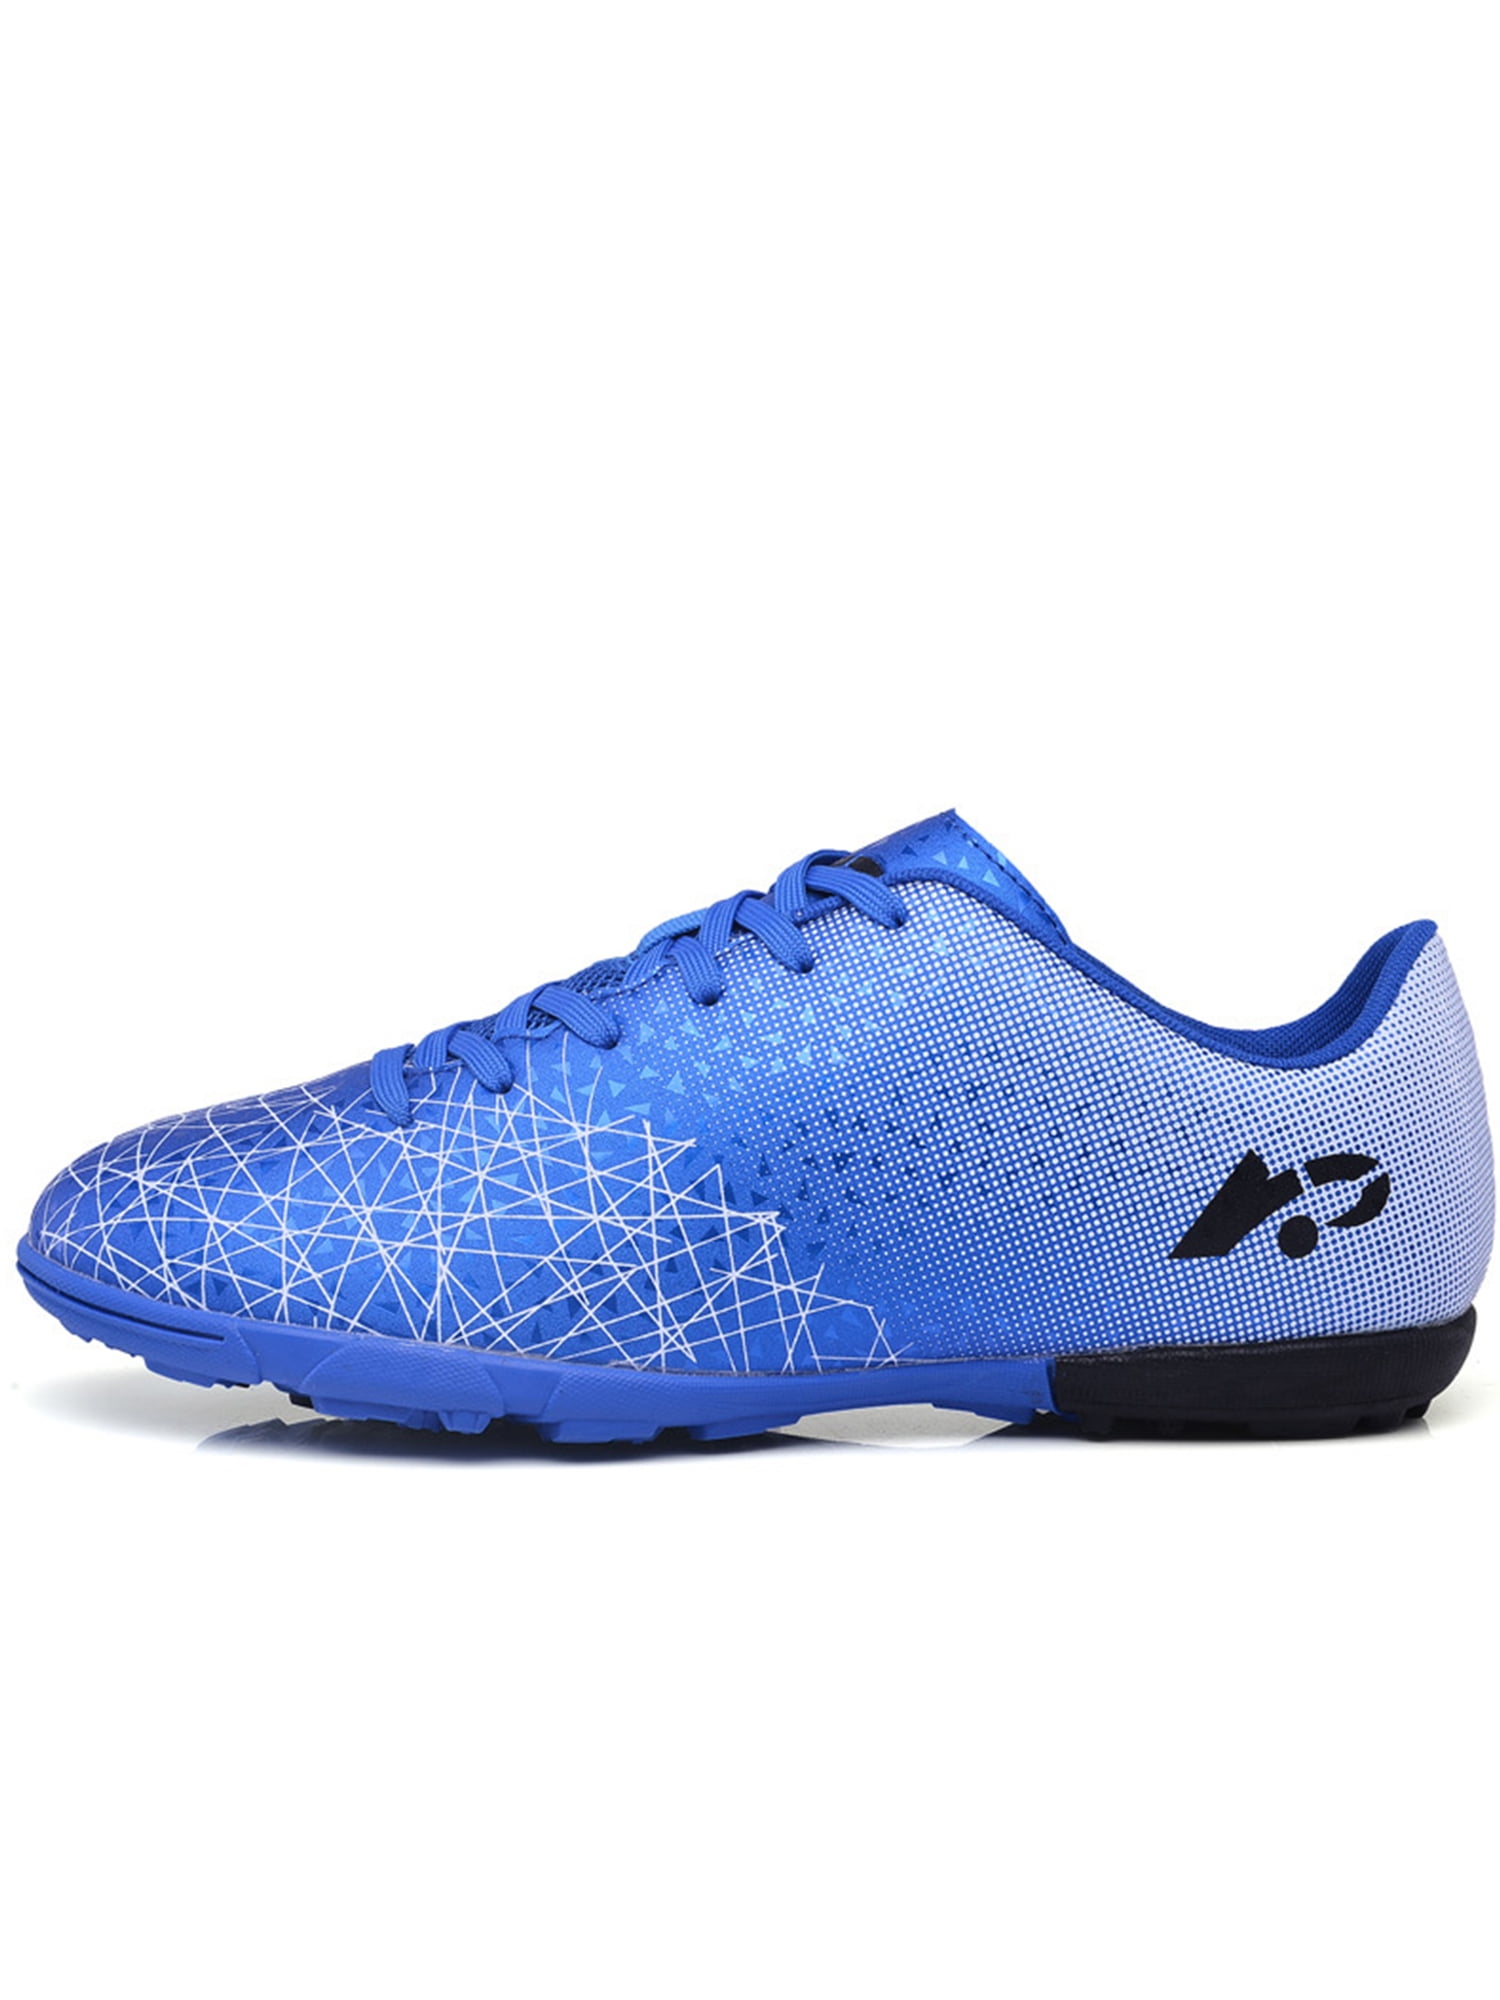 Mens Kids Boys Teens Outdoor Sports FG Moulded Studs Soccer Shoes Football Shoes 